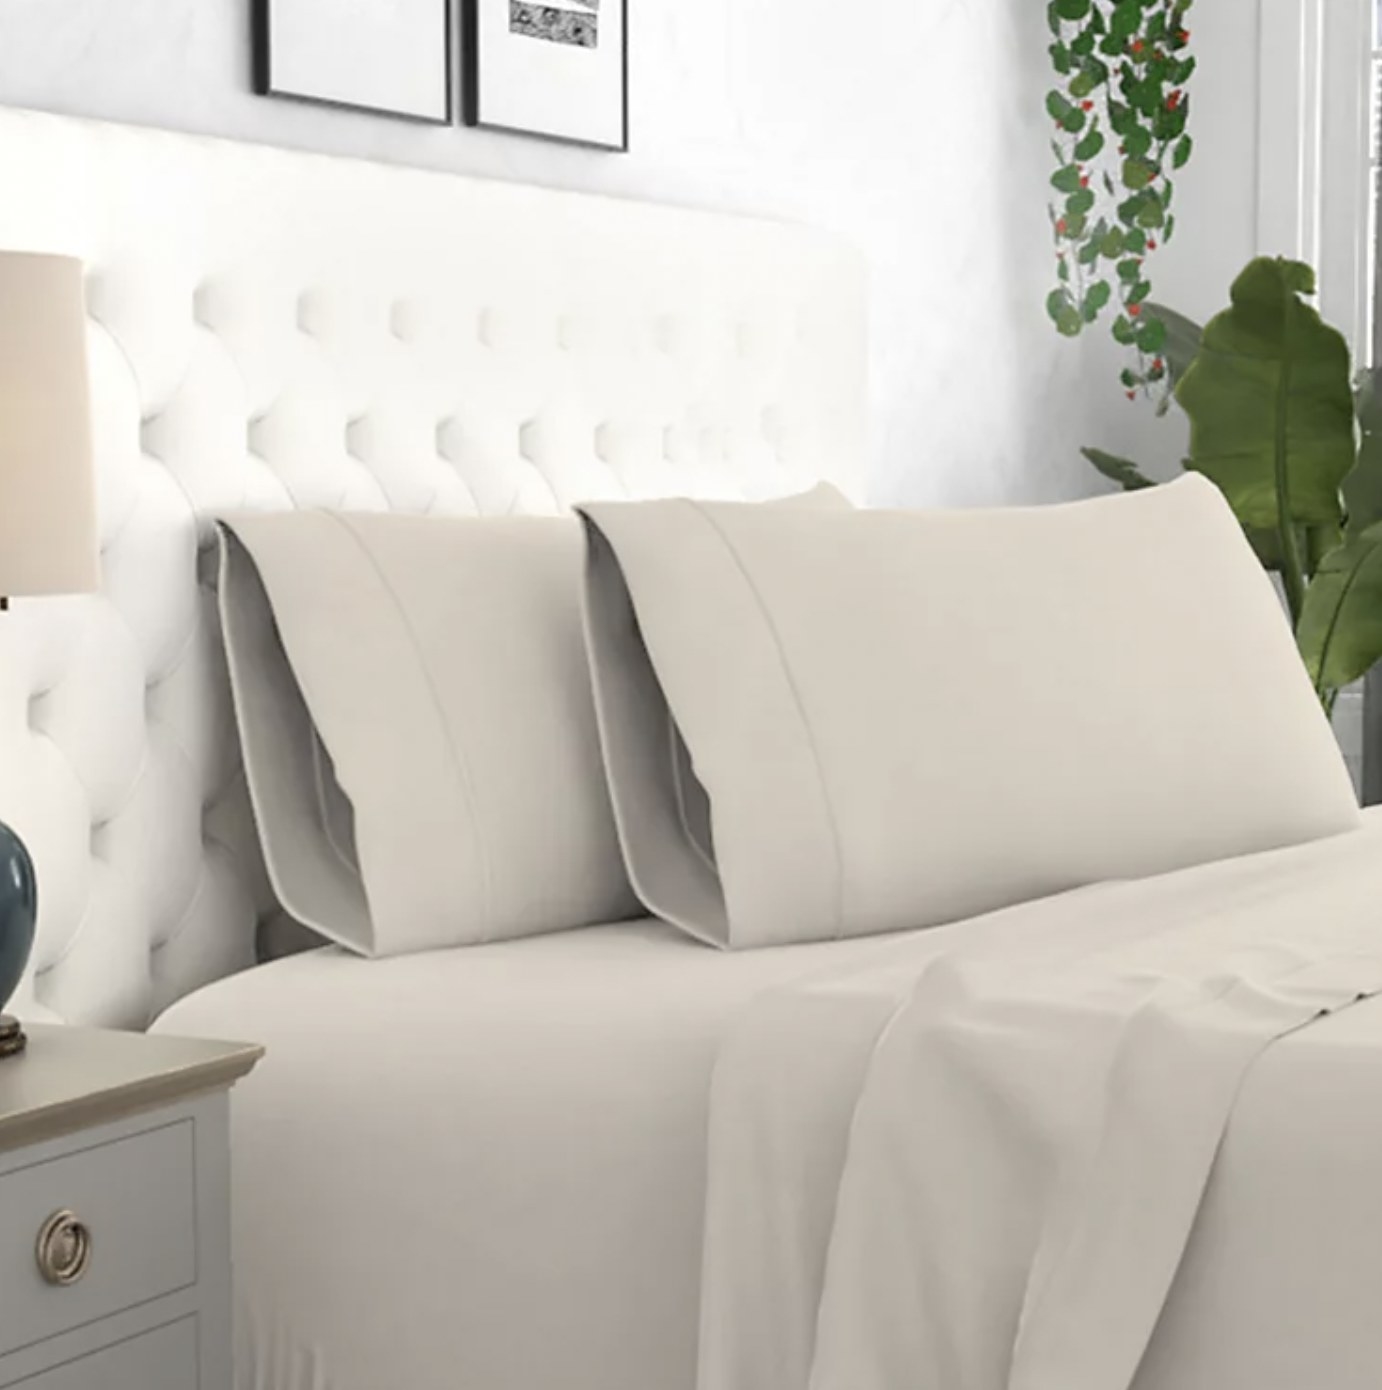 The beige pillowcases on pillows on bed